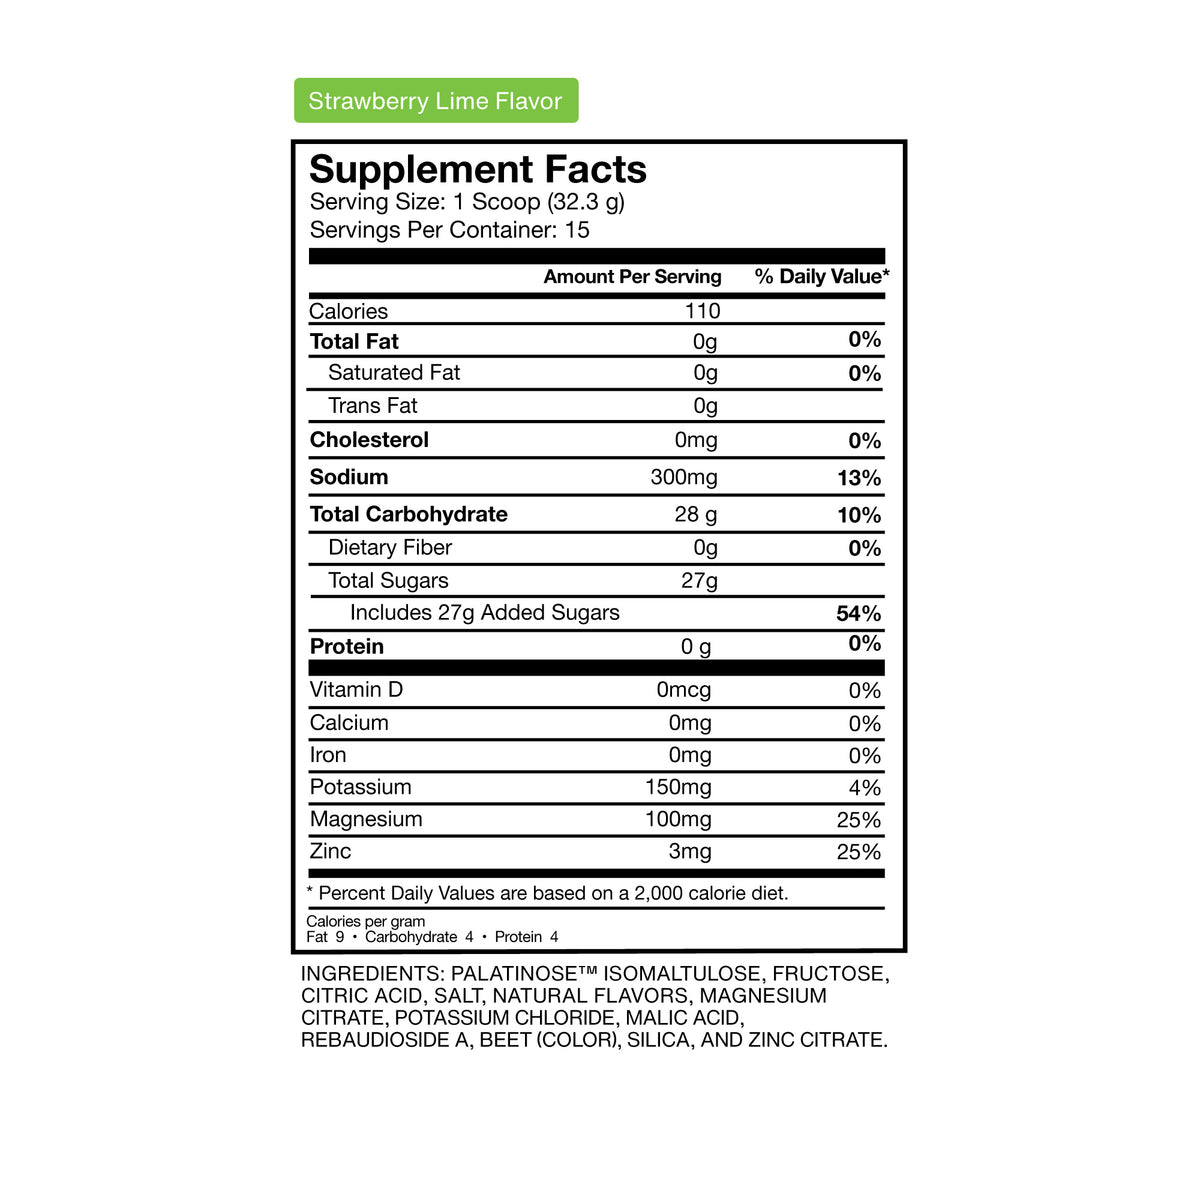 Strawberry Lime Flavored Fuel Supplement Facts